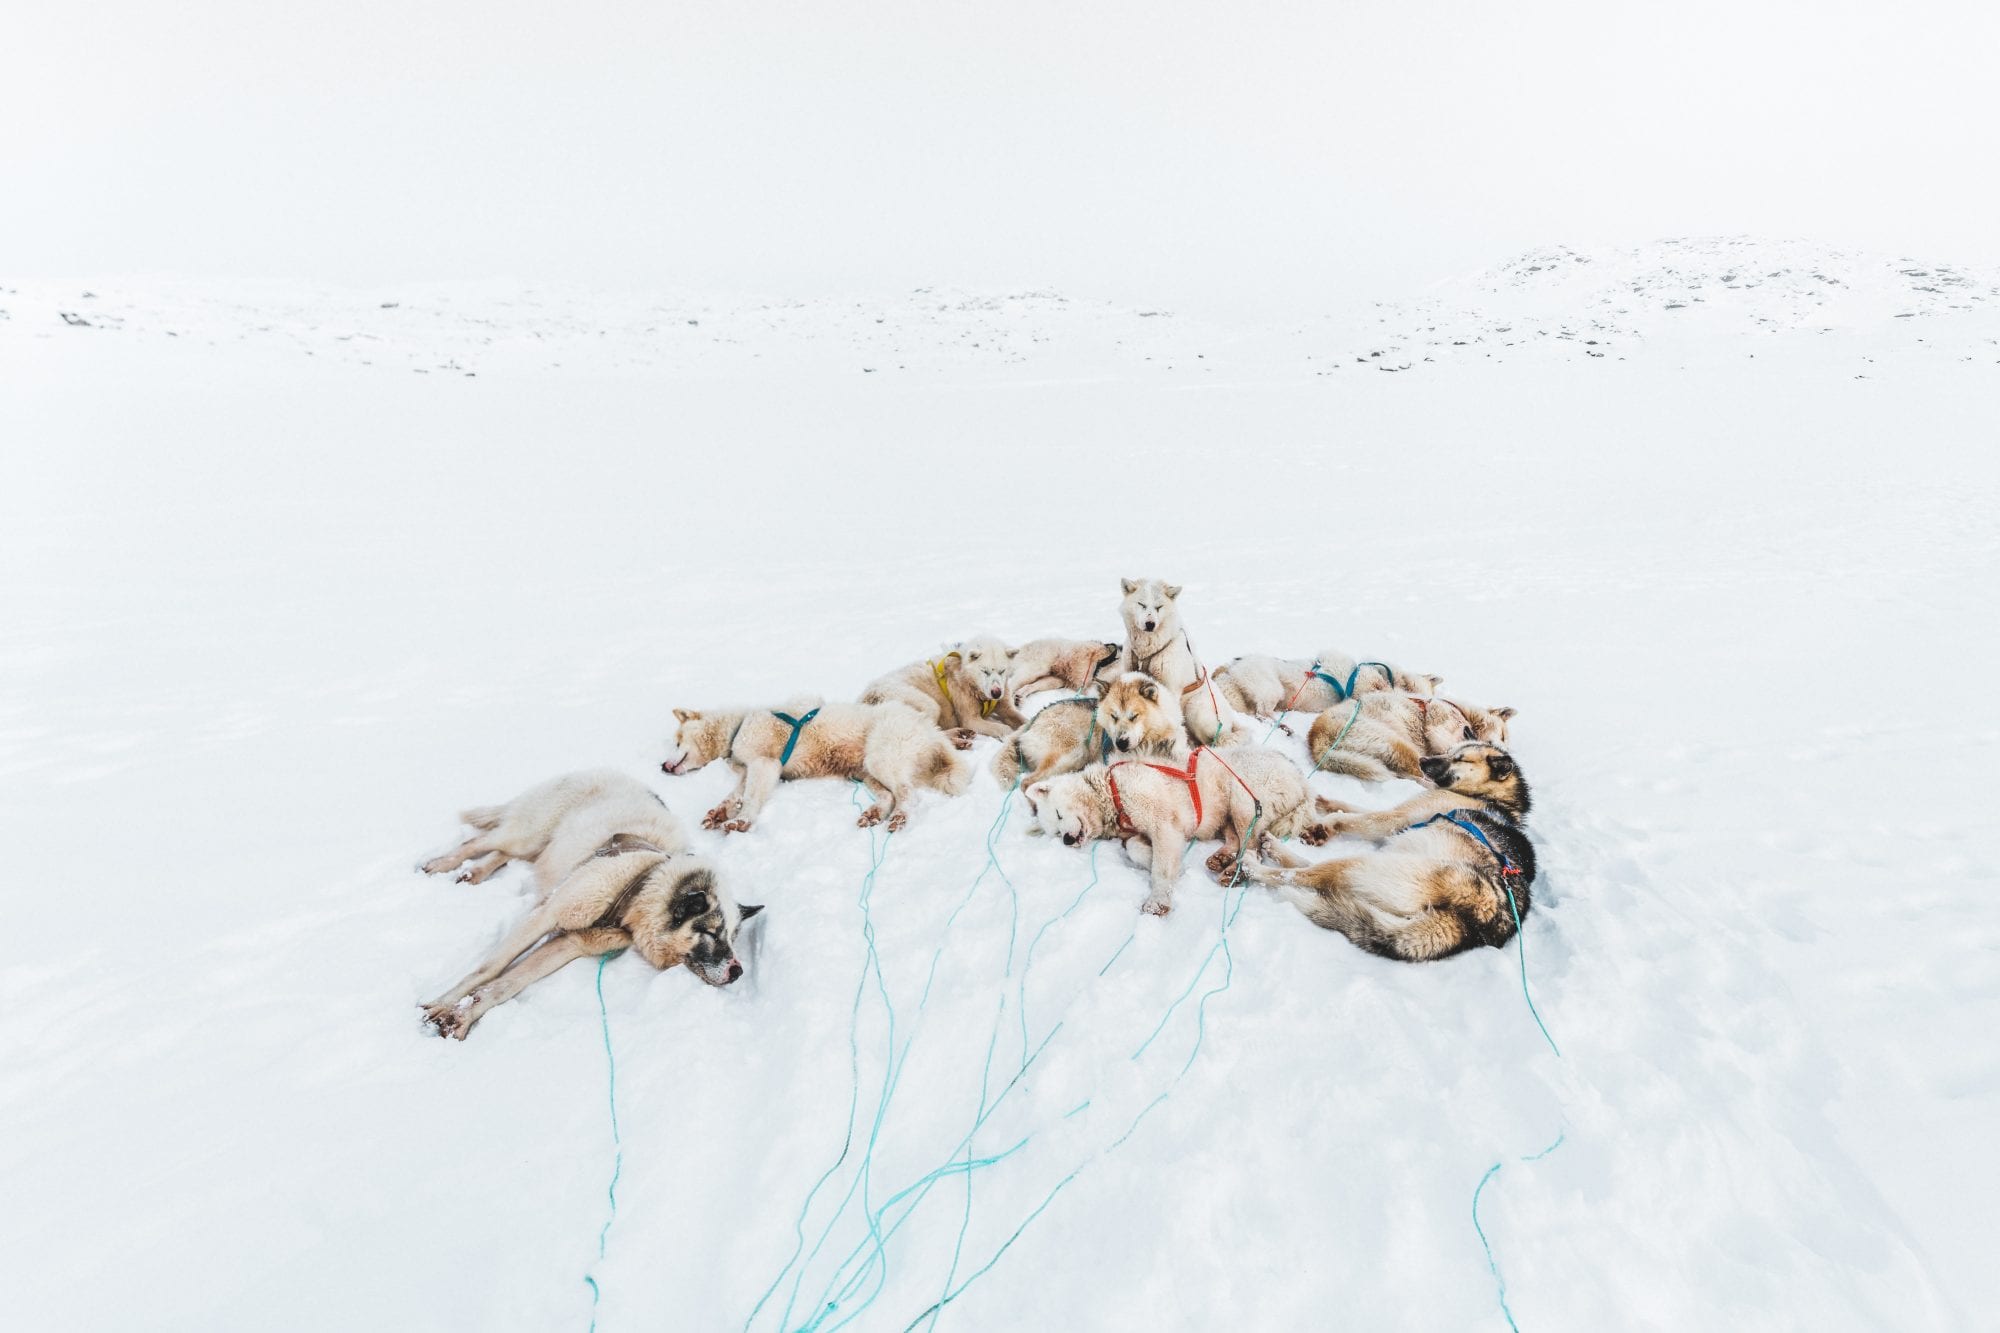 A pack of huskies laying together in the snow with harnesses attaching them to the sled